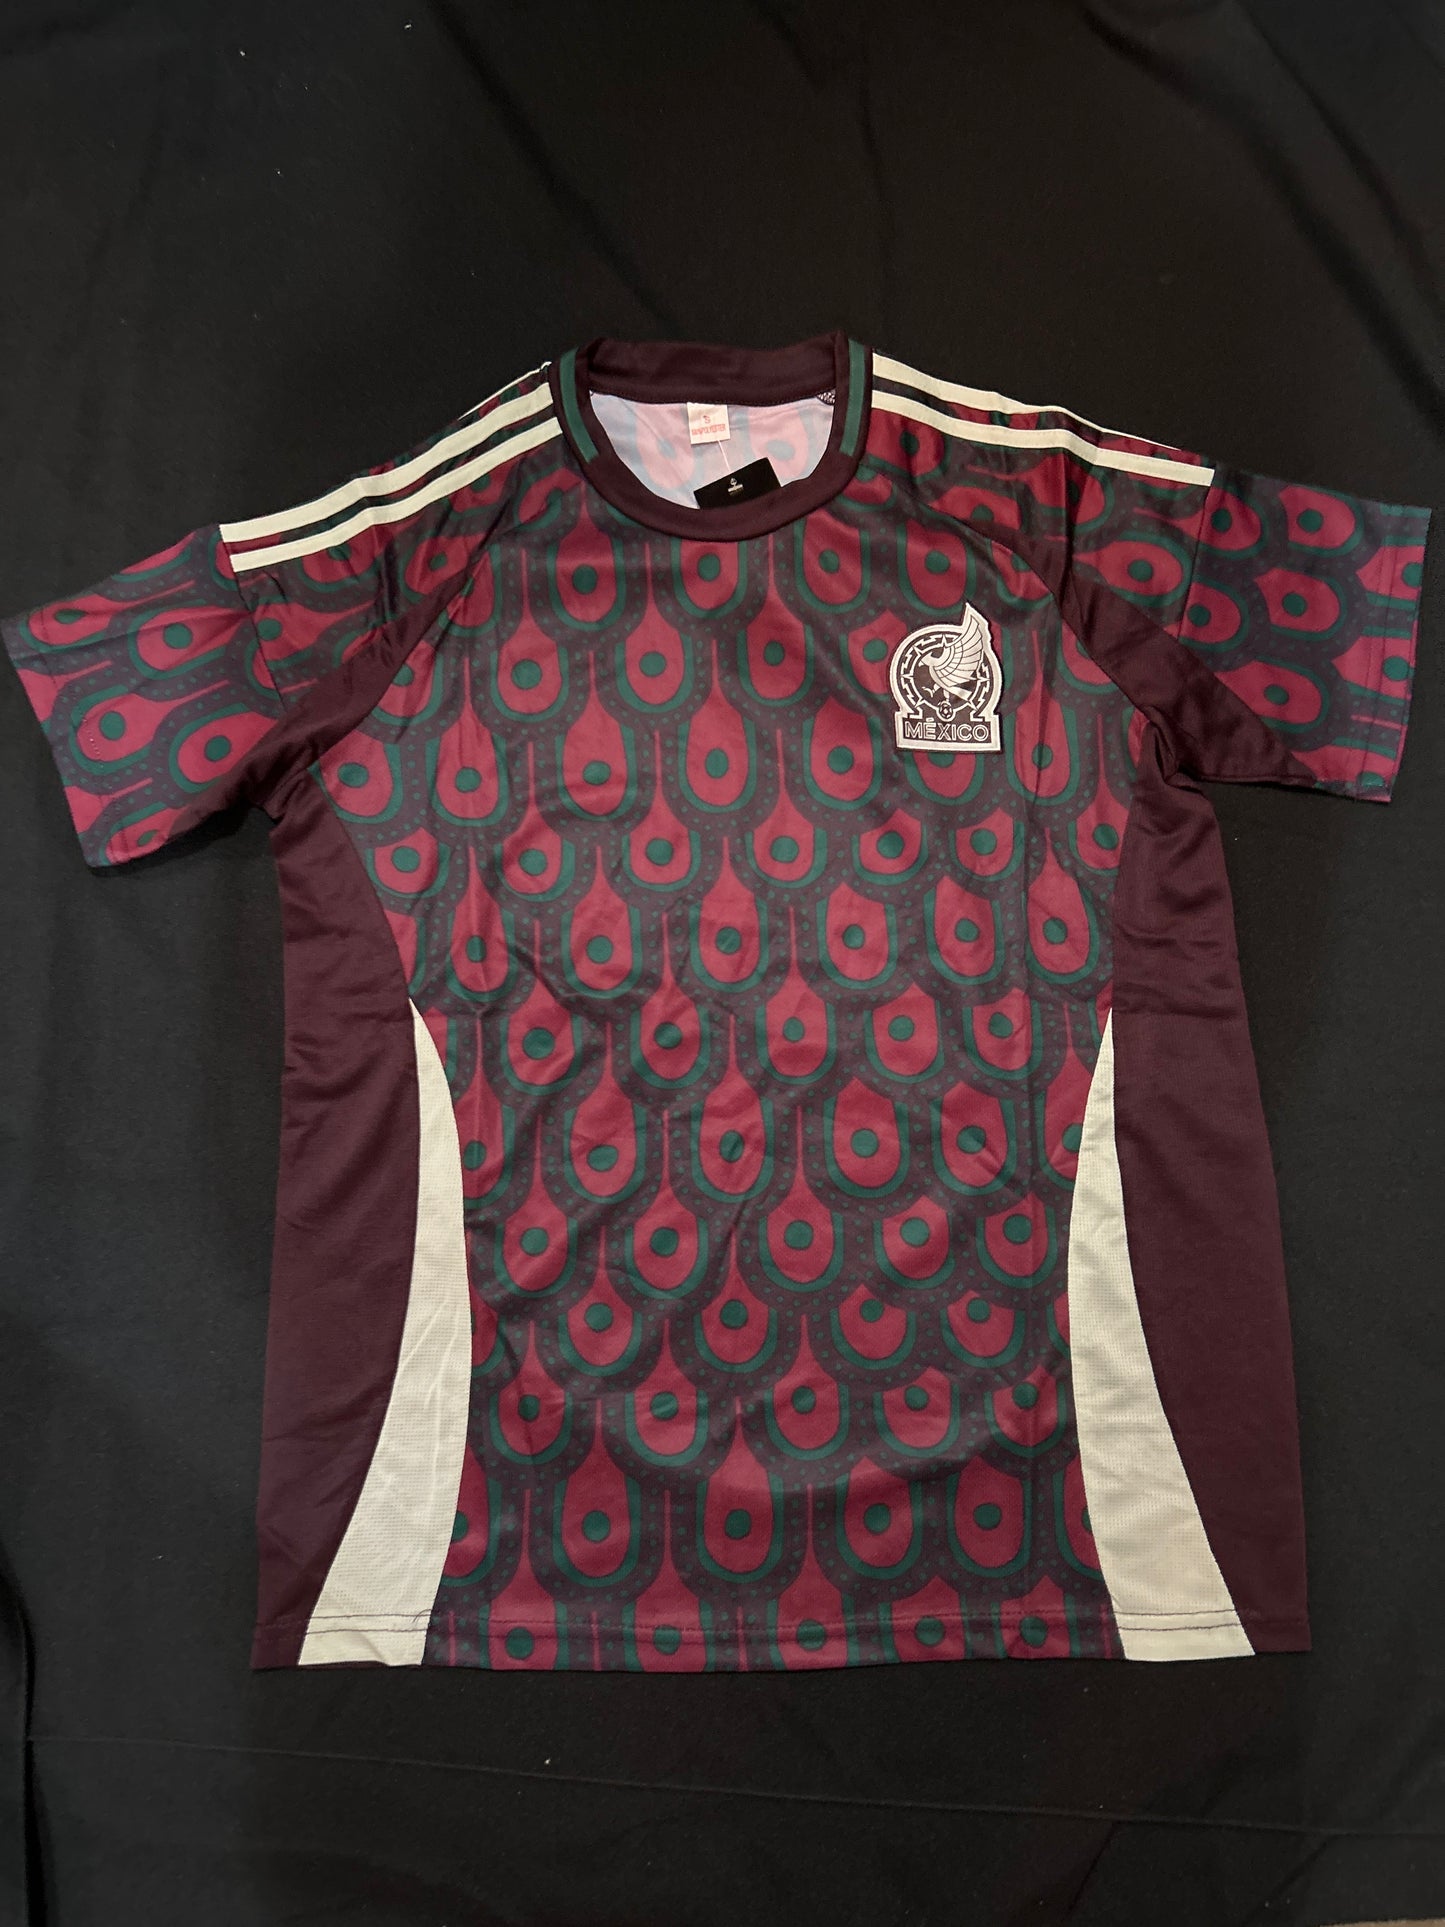 Mexico Soccer Team Jersey and Short Set